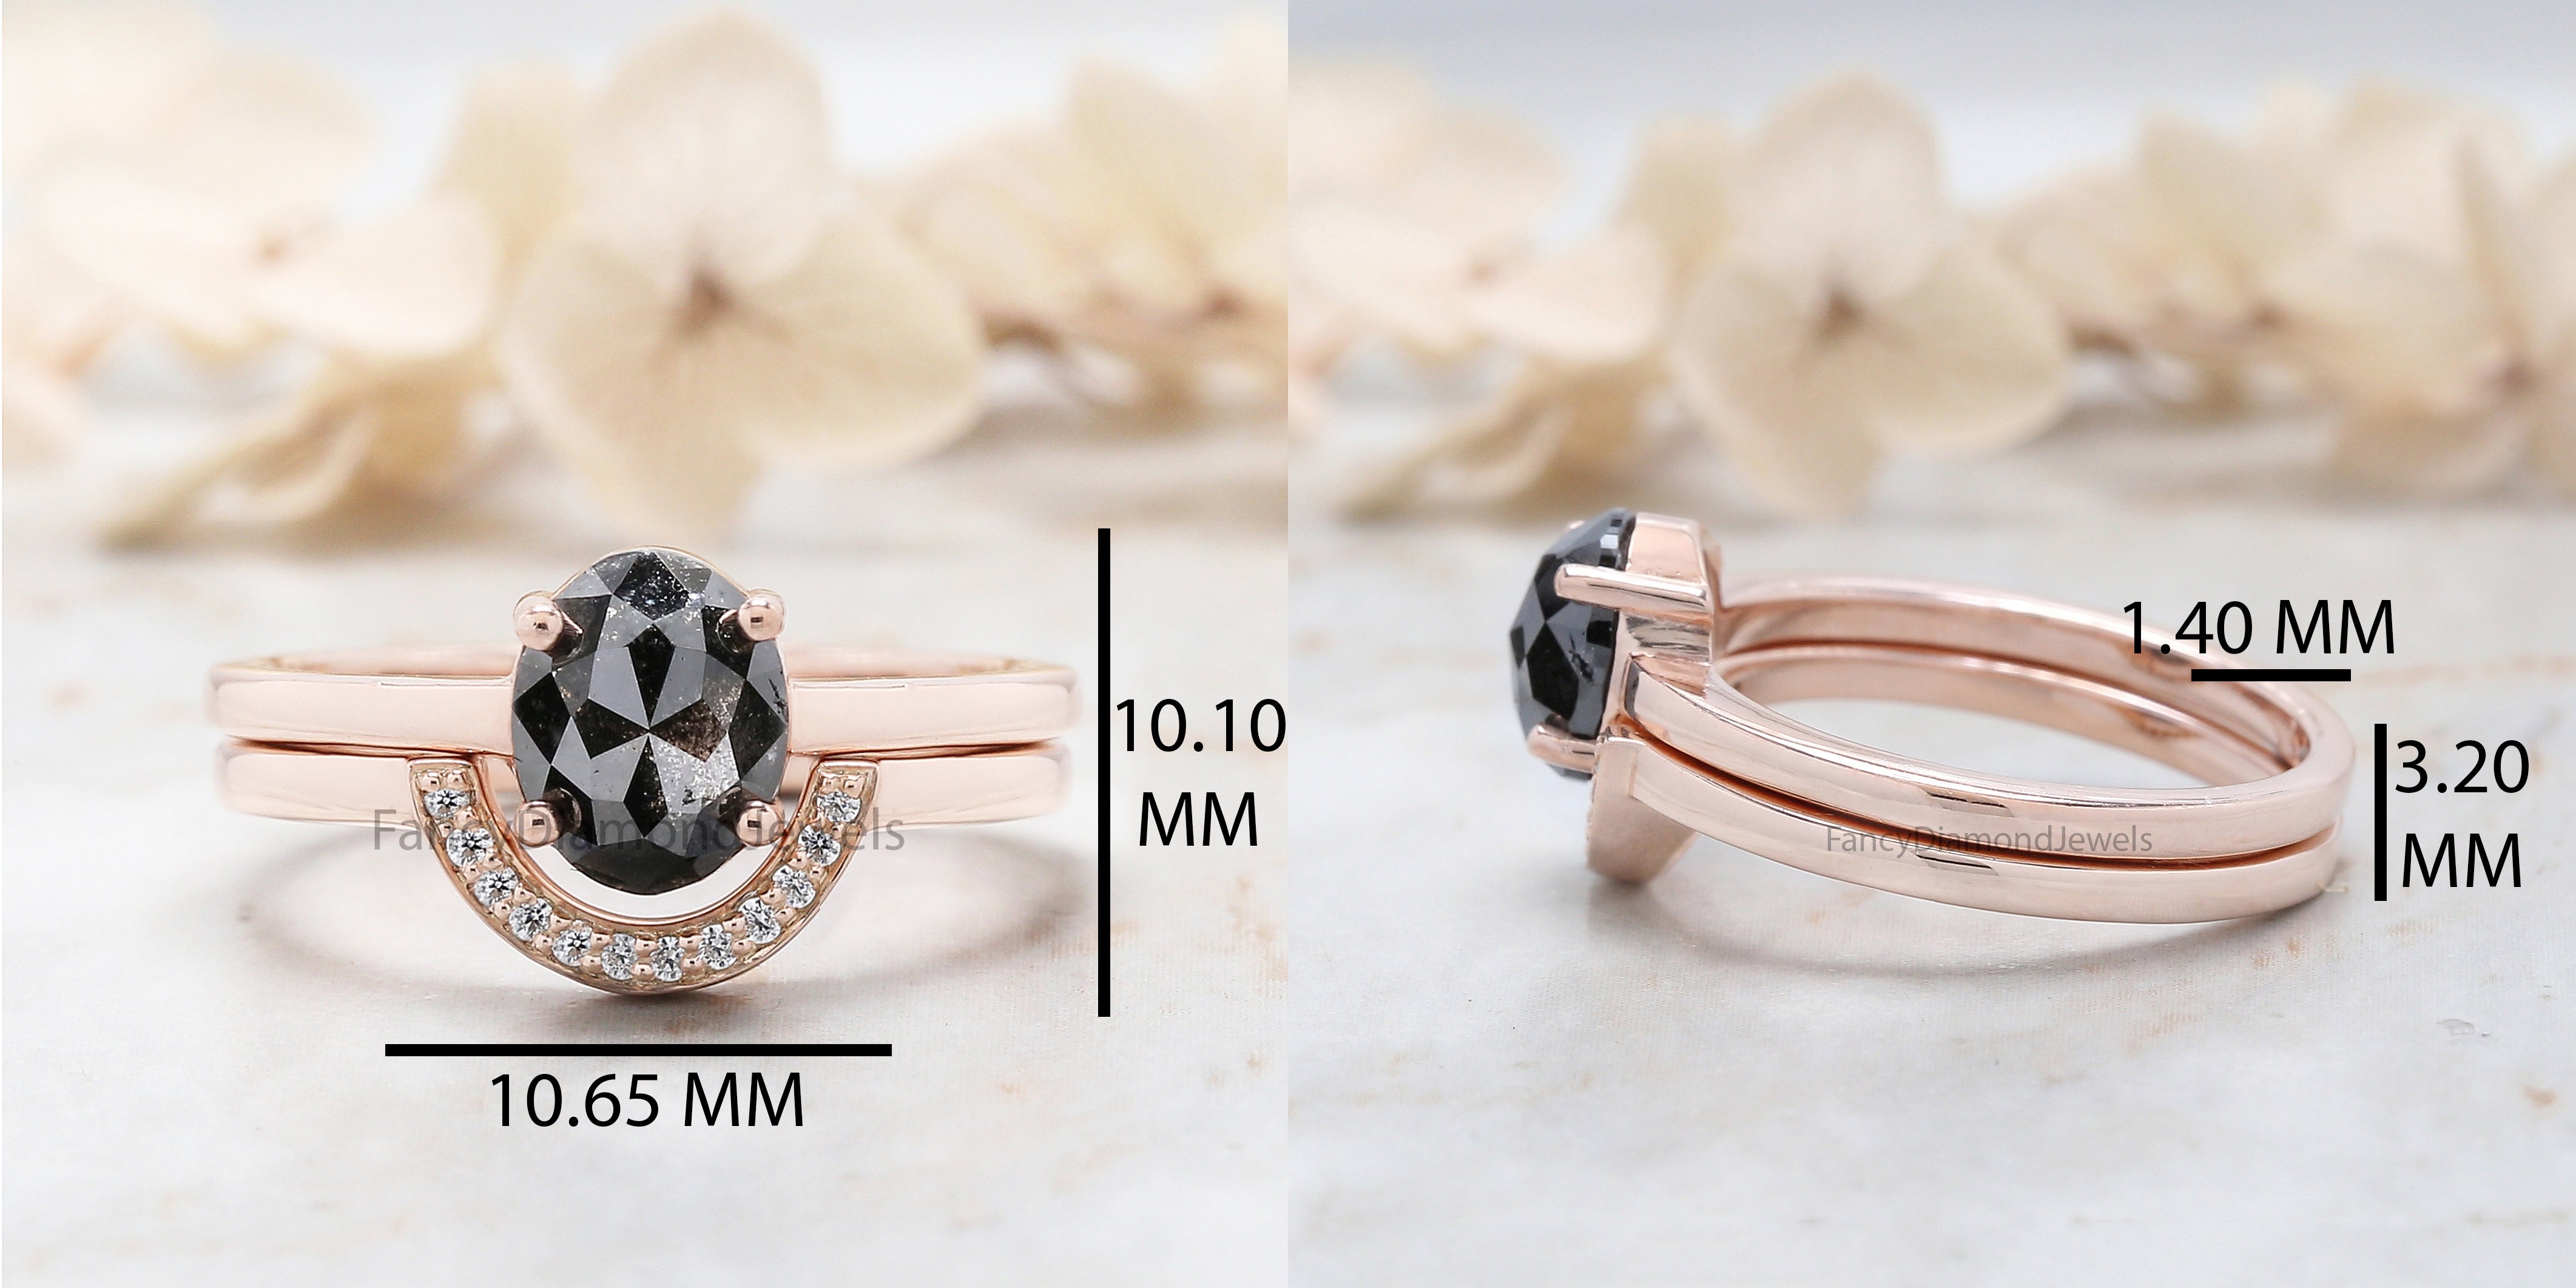 Oval Cut Salt And Pepper Diamond Ring 1.28 Ct 7.55 MM Oval Diamond Ring 14K Solid Rose Gold Silver Oval Engagement Ring Gift For Her QL3079